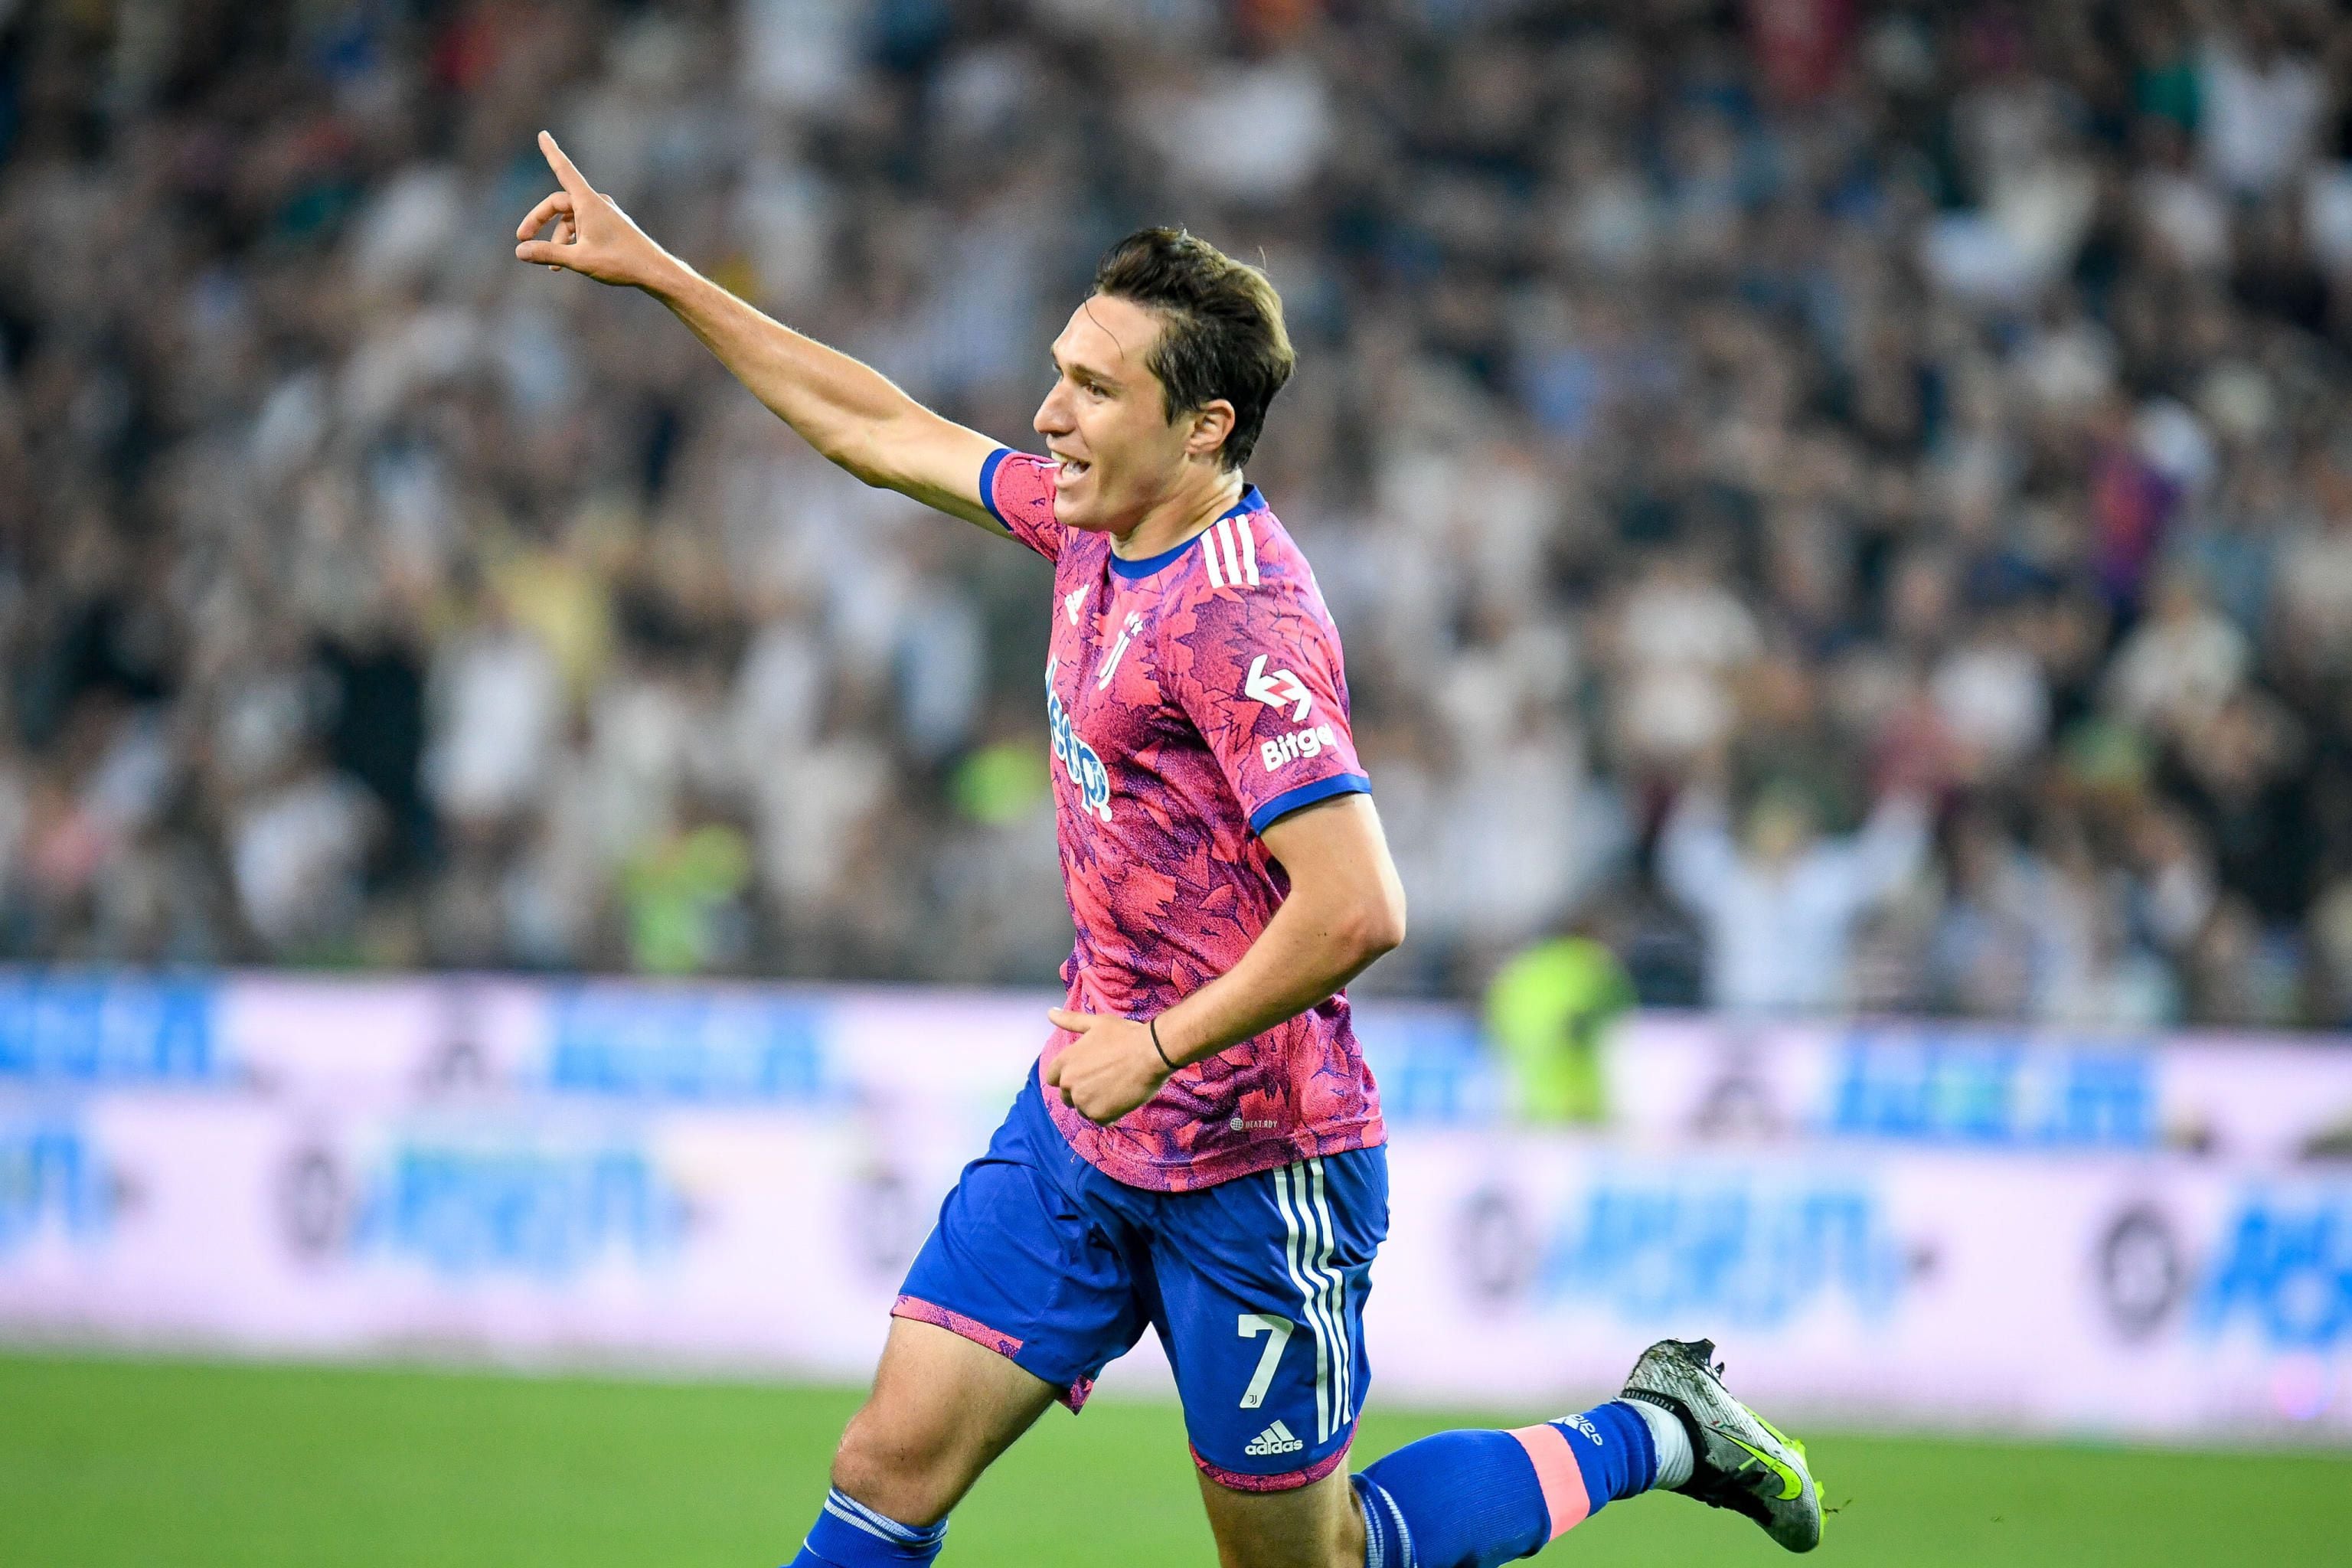 Udine (Italy), 04/06/2023.- Juventus's Federico Chiesa celebrates after scoring the 0-1 goal during the Italian Serie A soccer match between Udinese Calcio and Juventus FC in Udine, Italy, 04 June 2023. (Italia) EFE/EPA/ETTORE GRIFFONI
